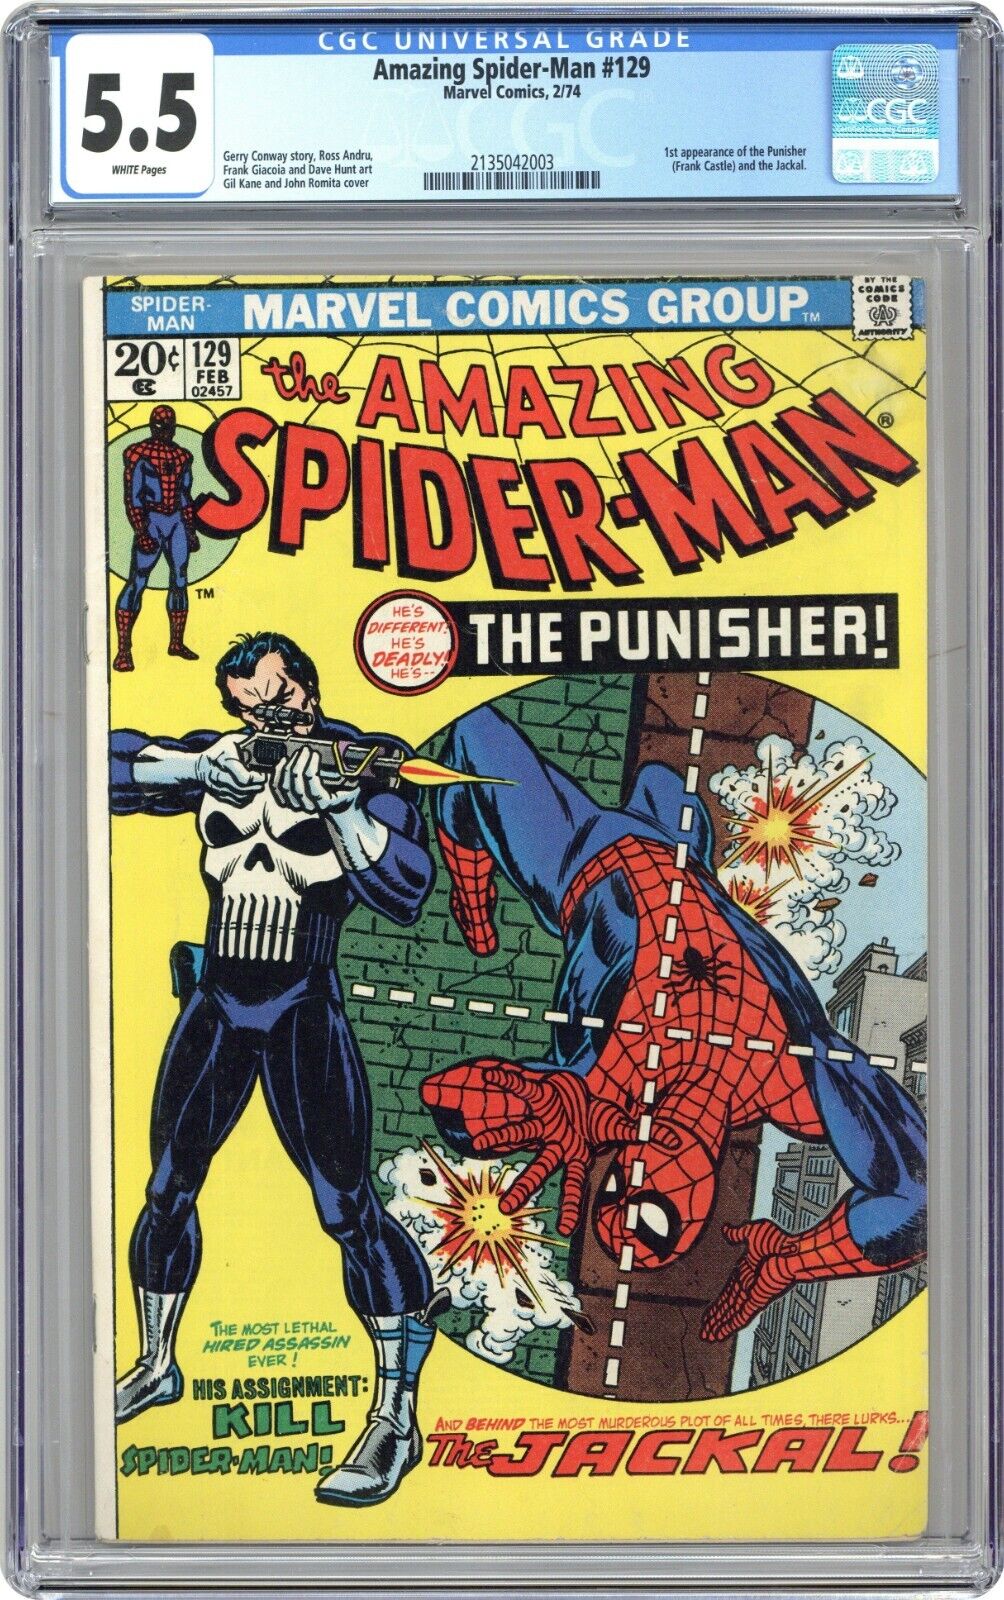 Amazing SpiderMan 129 CGC 55  1st App of Punisher Frank Castle  white pages